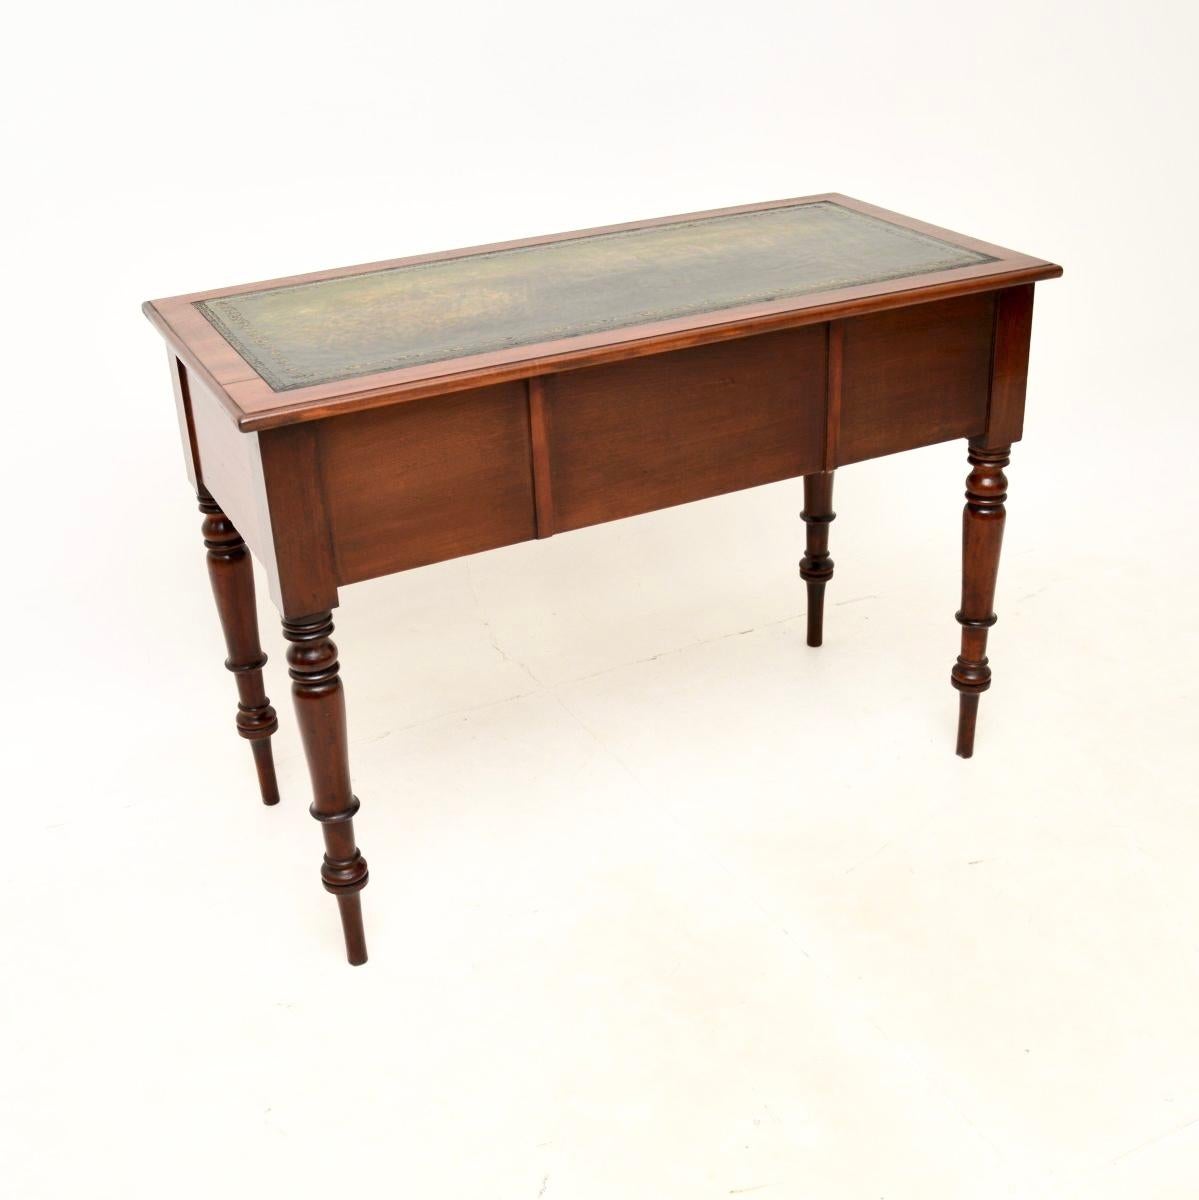 Early 19th Century Antique Georgian Period Writing Table / Desk For Sale